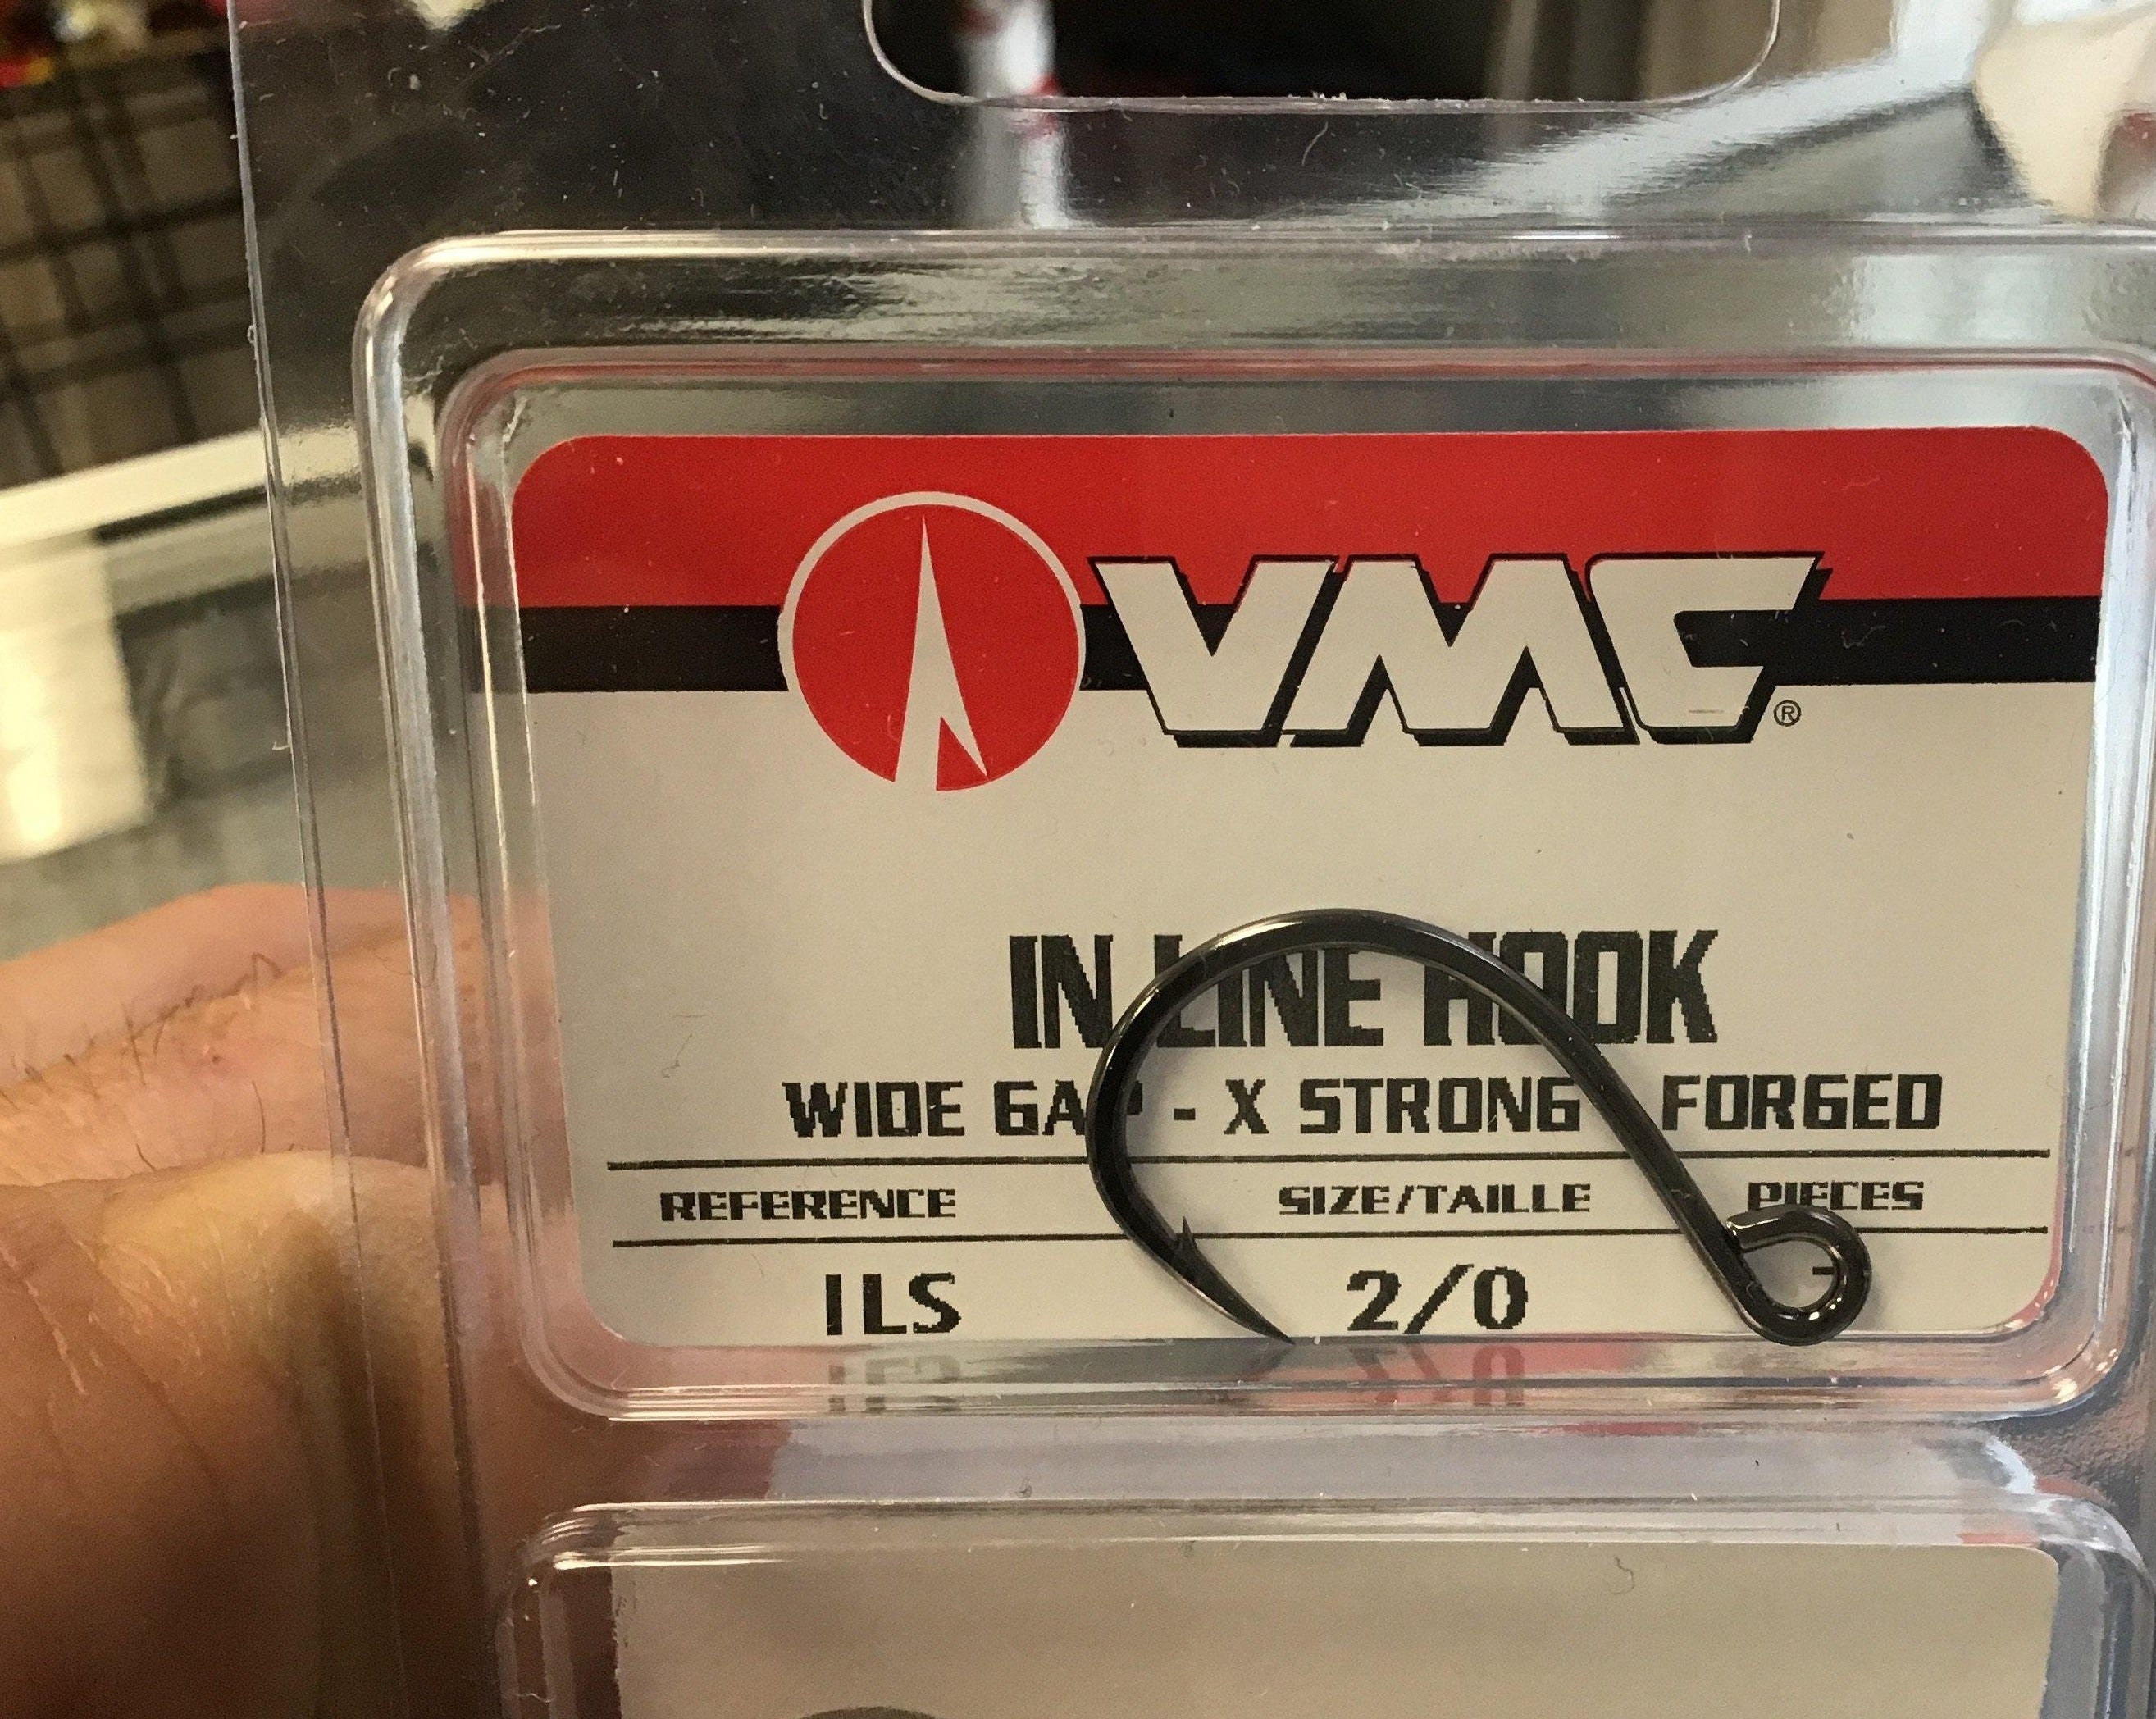 VMC In Line Hook Wide Gap X Strong Forged Black - Fish & Tackle